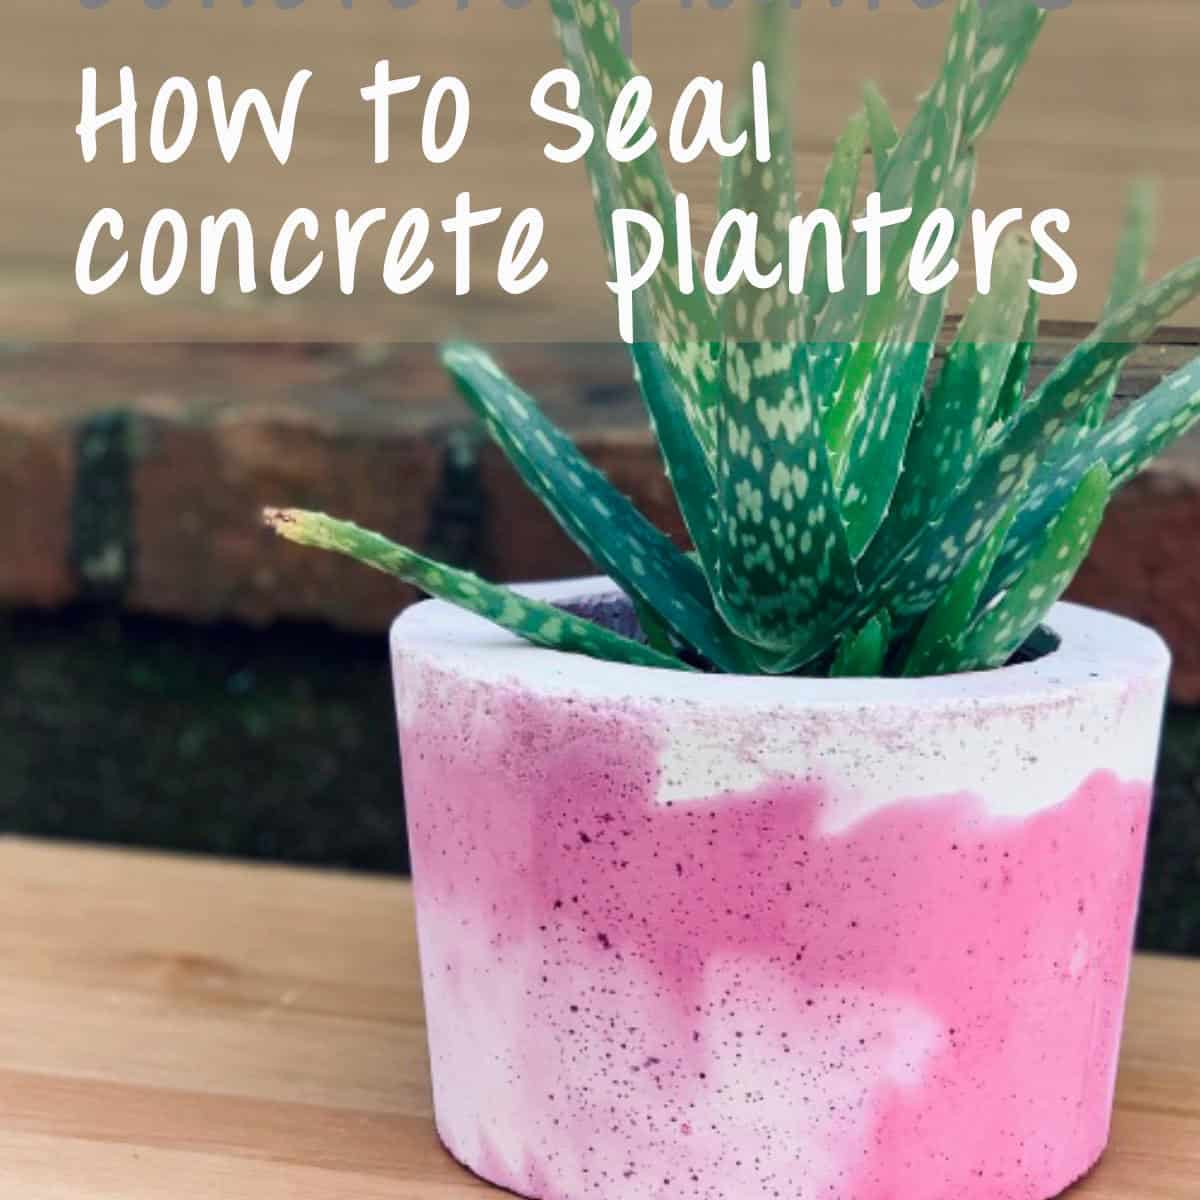 a concrete planter with bright pink coloring with a plant inside